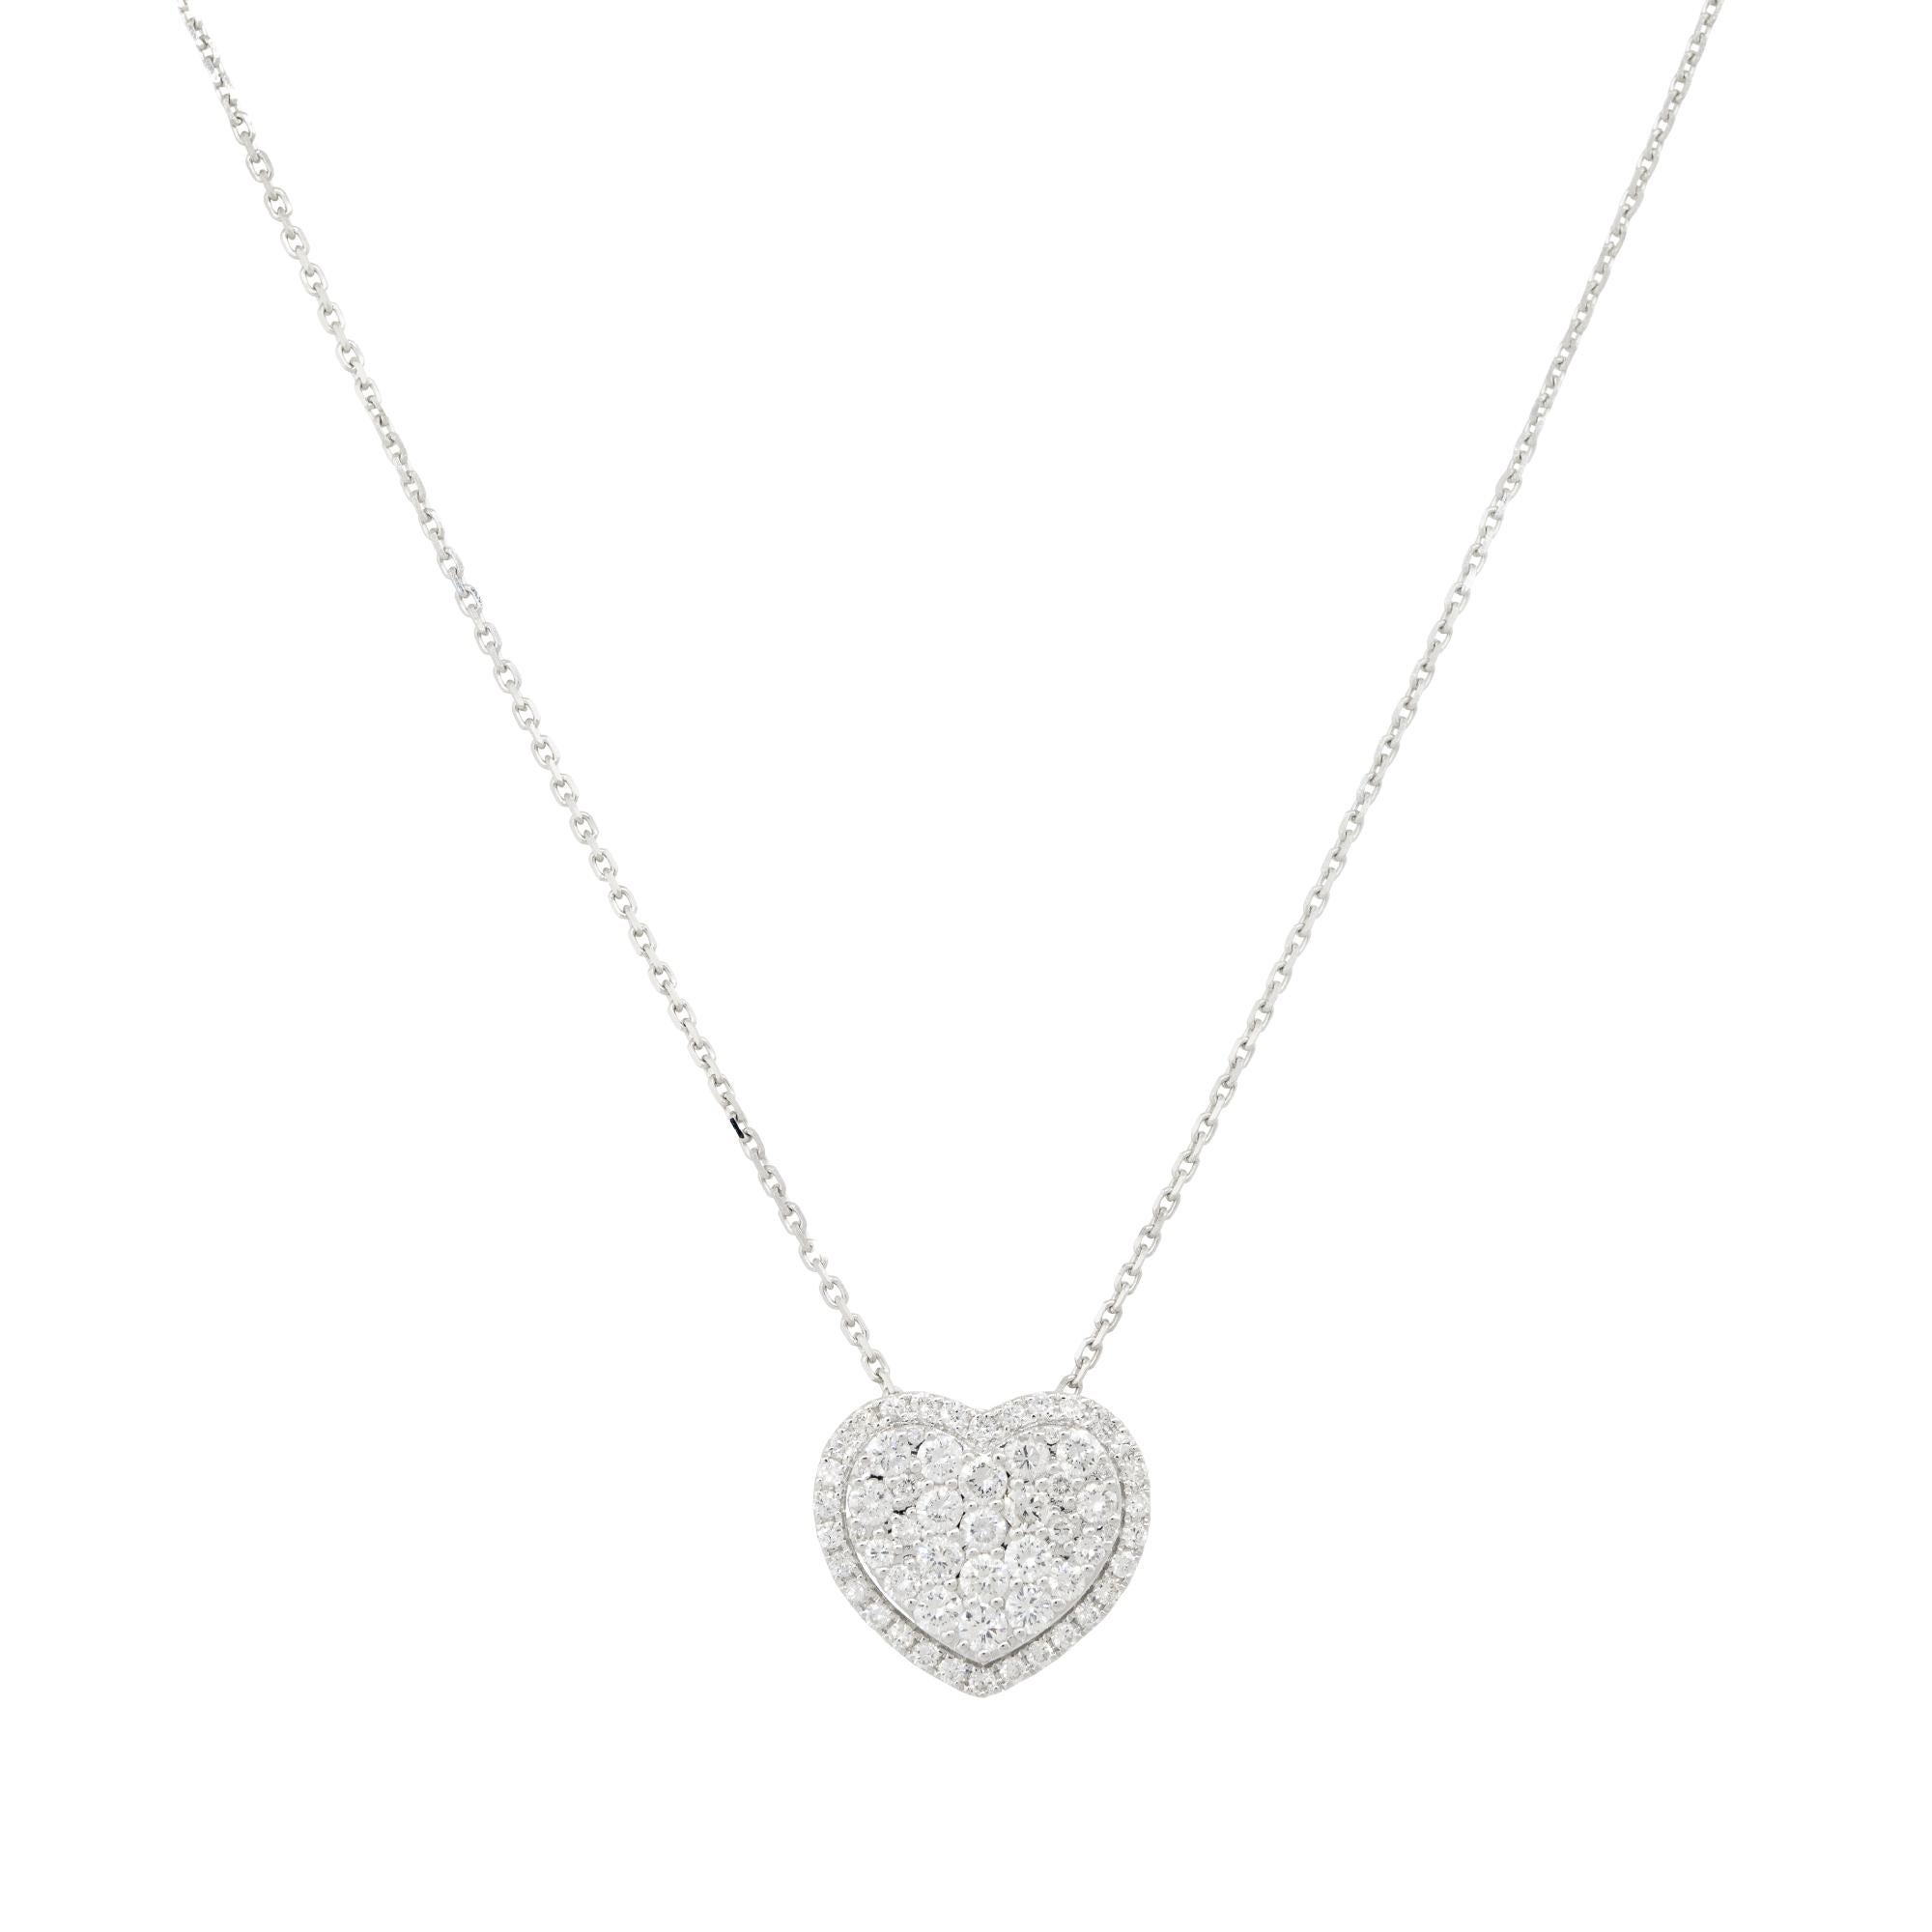 18k White Gold 1.0ctw Pave Diamond Heart Necklace
Material: 18k White Gold
Diamond Details: Approximately 1.0ctw of Round Brilliant Diamonds. There are 60 stones total
Necklace Length: Necklace measures 18